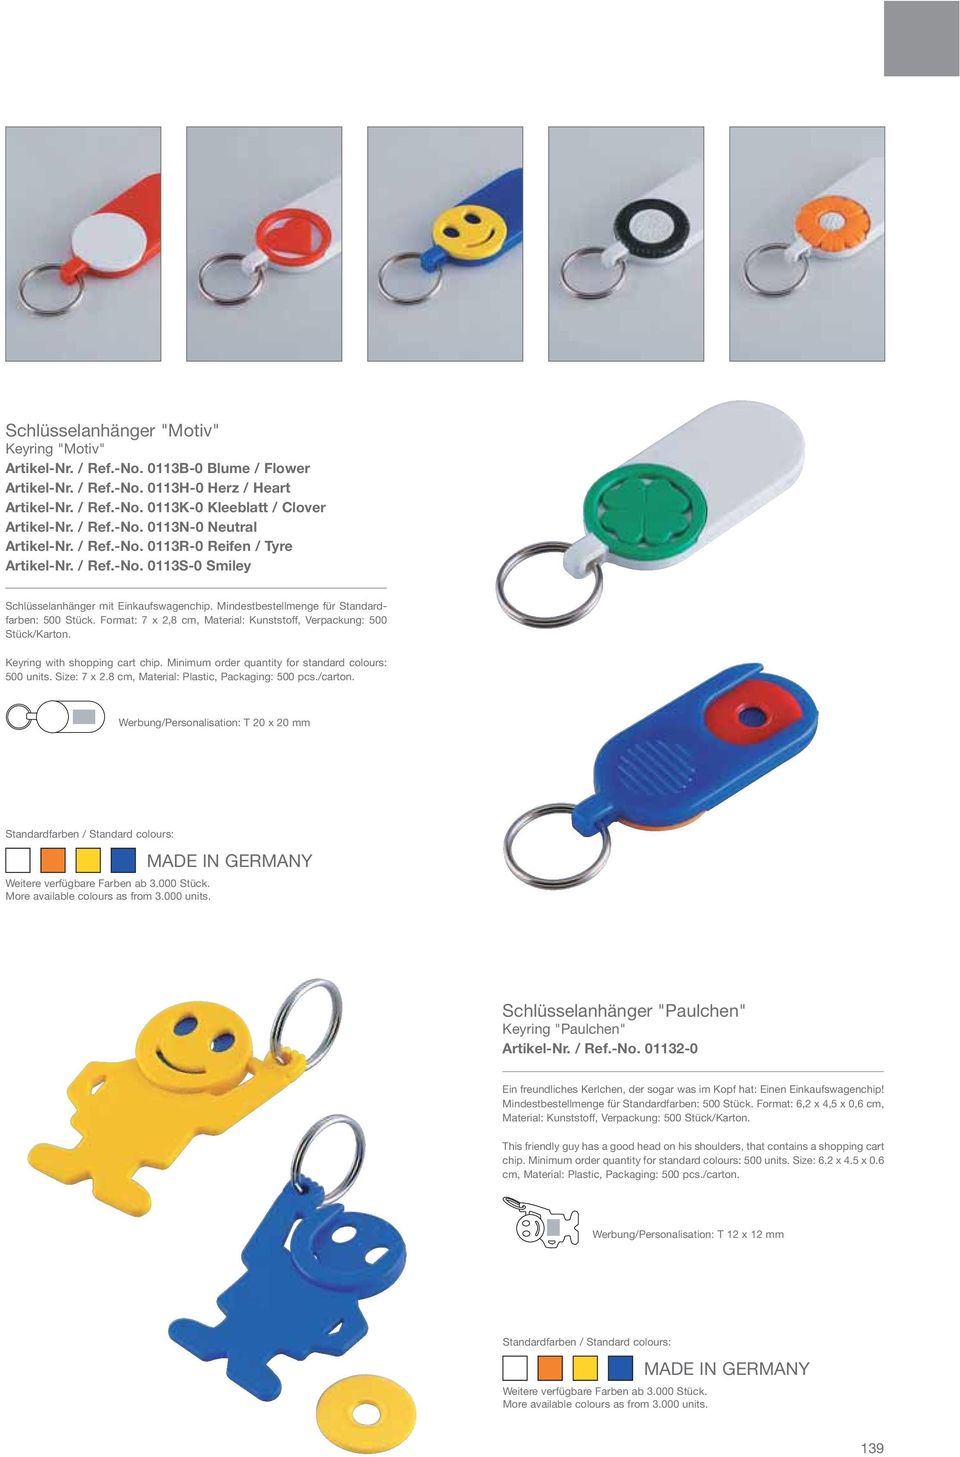 Format: 7 x 2,8 cm, Material: Kunststoff, Verpackung: 500 Stück/Karton. Keyring with shopping cart chip. Minimum order quantity for standard colours: 500 units. Size: 7 x 2.